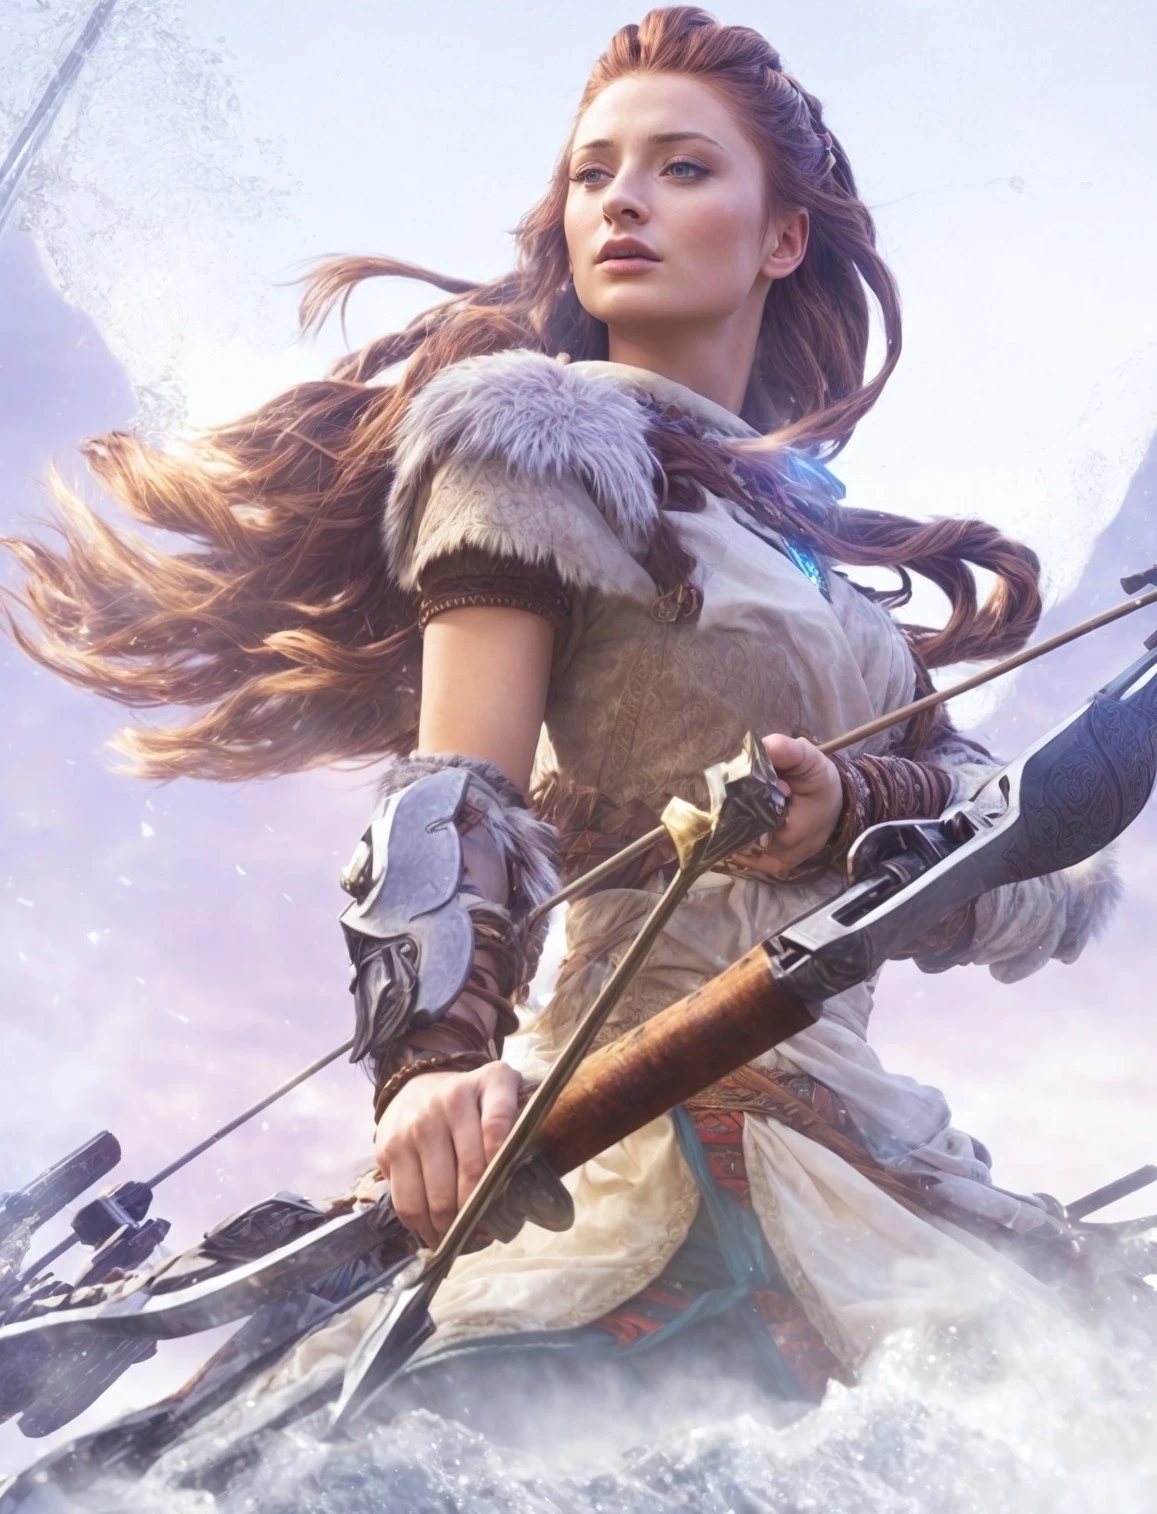 Together With Her New Allies, Aloy Sets Out To Save The World From Dangerous Corrupted Machines And Worldwide Extinction